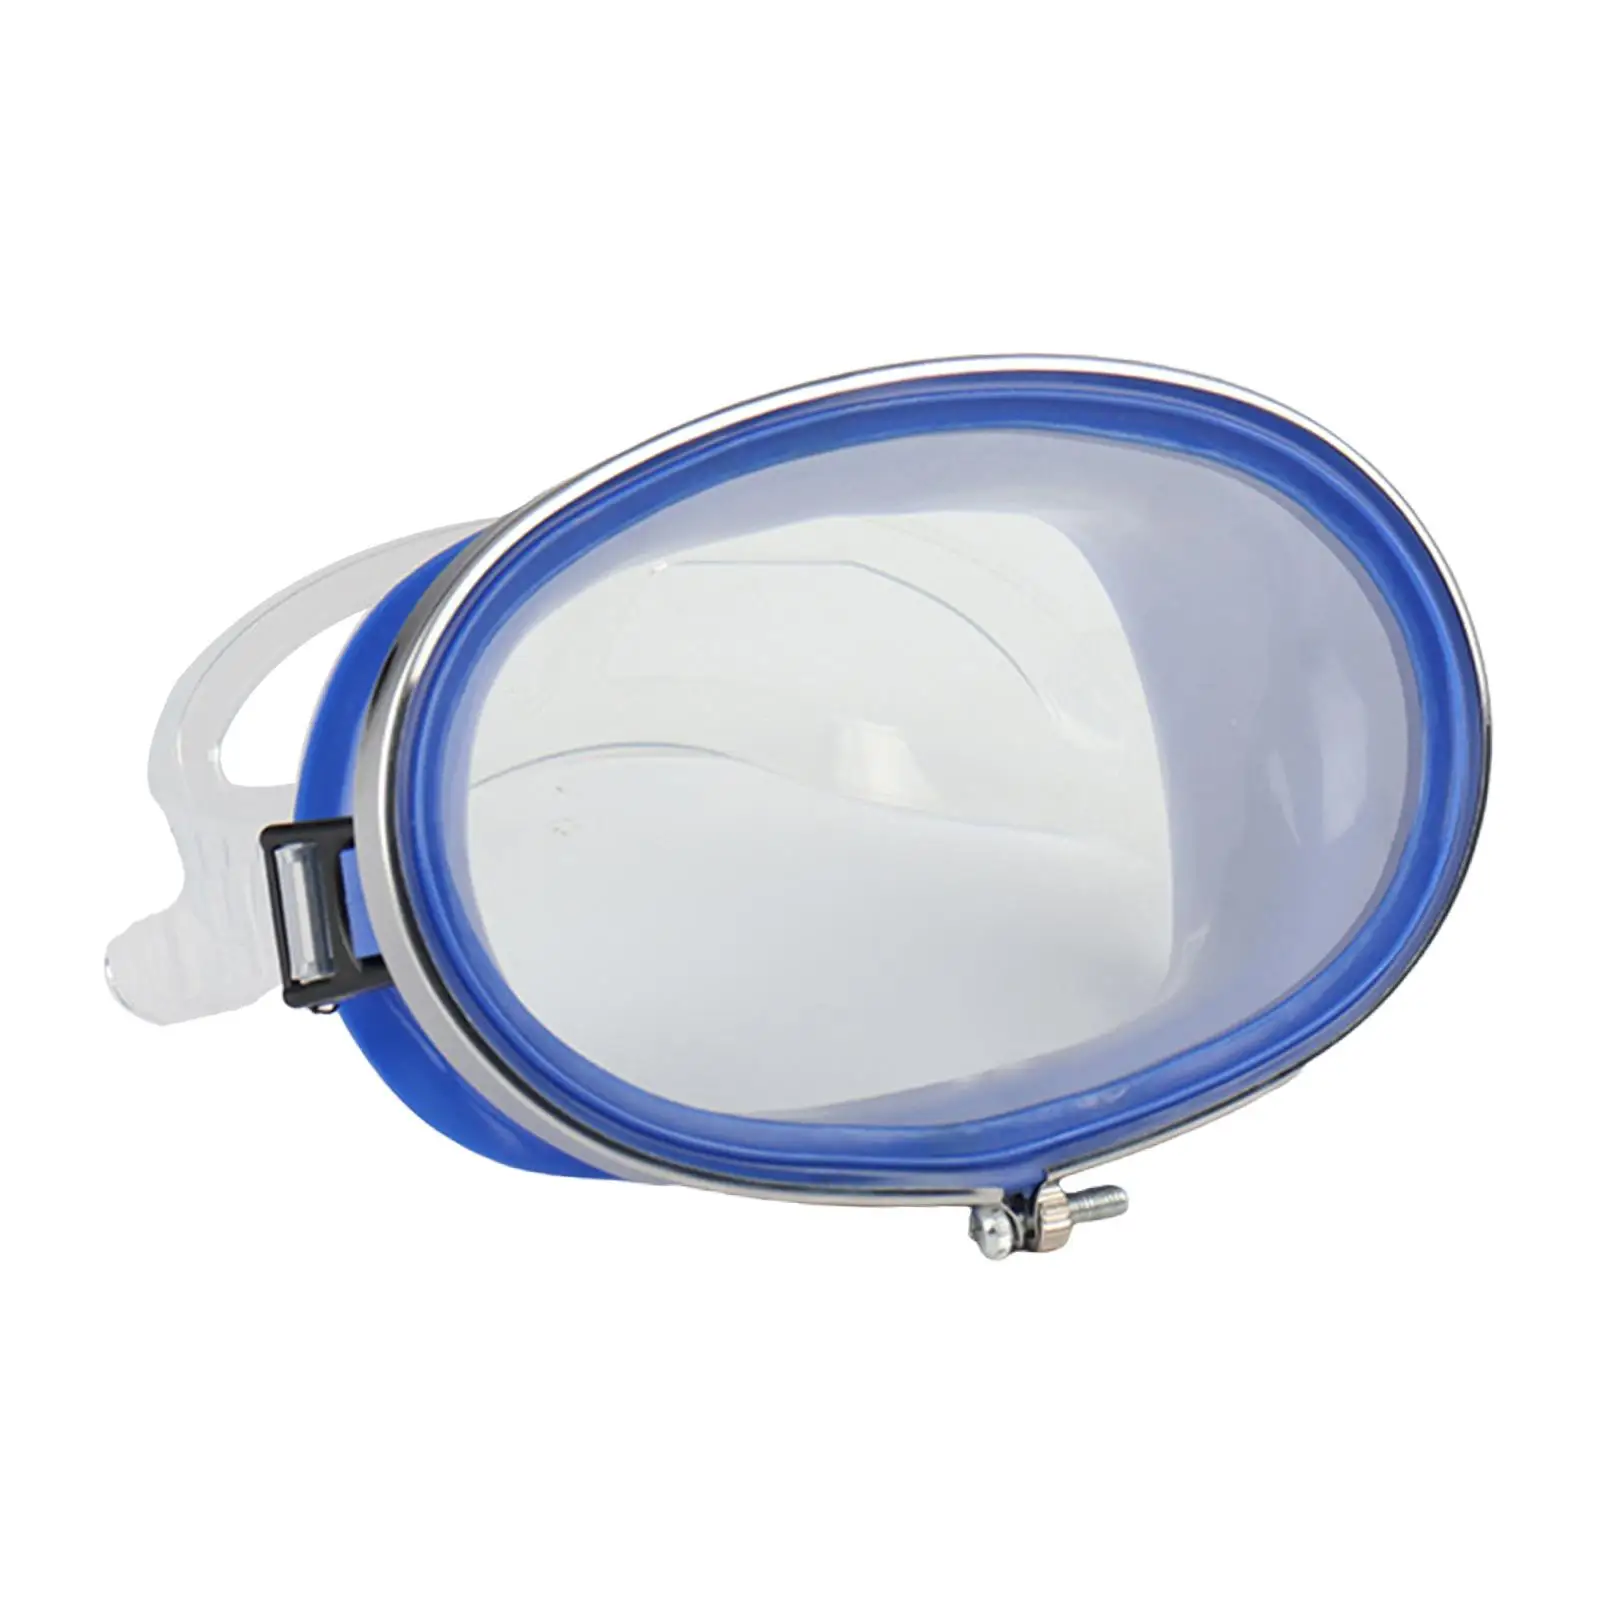 Diving Mask Snorkel Mask Stainless Steel Swimming Mask Oval Shape Diving Goggles